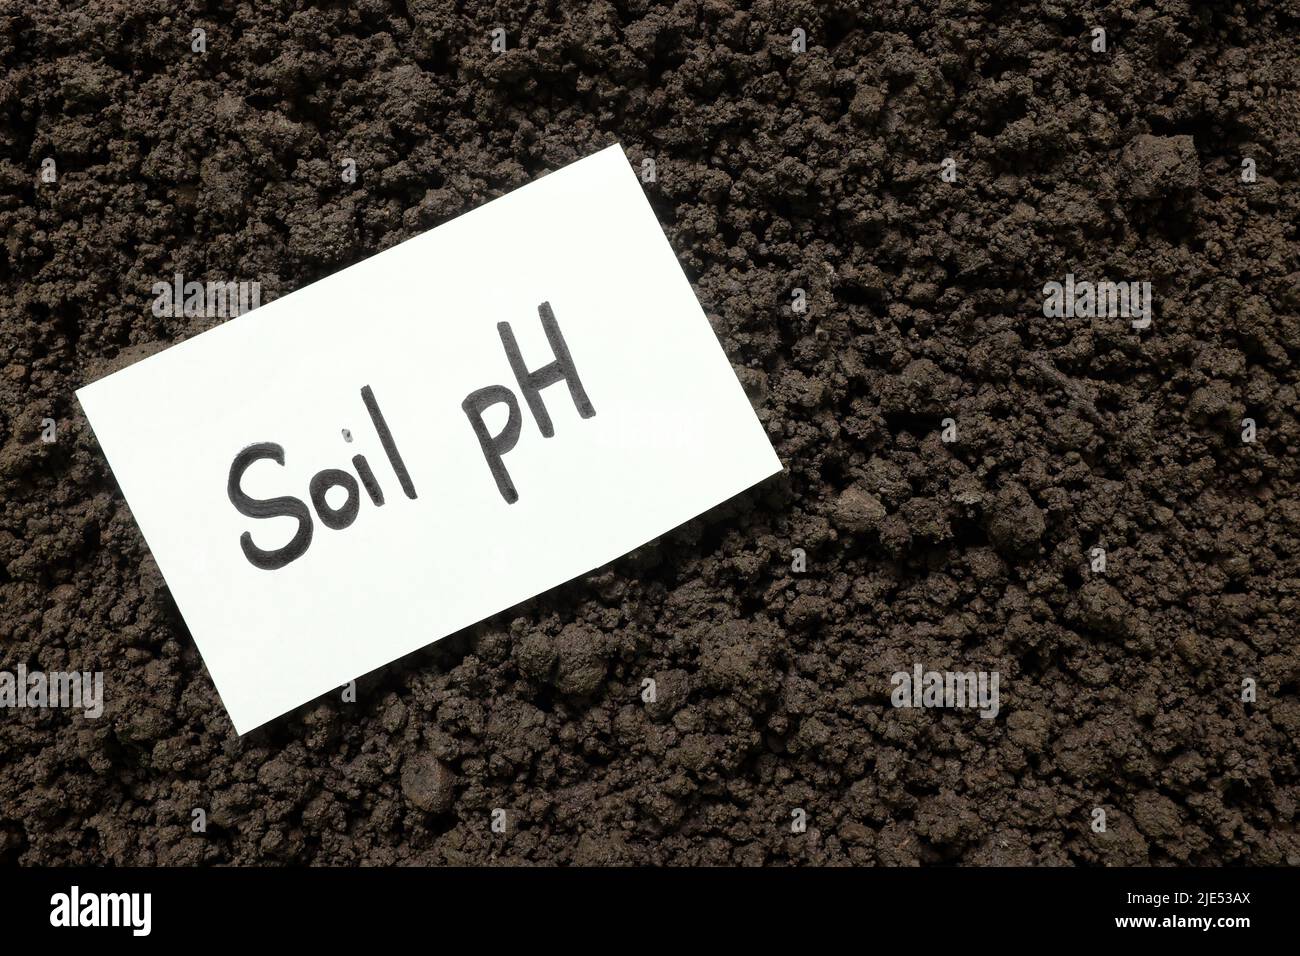 Soil pH agriculture concept. Written word on piece of paper on soil. Stock Photo